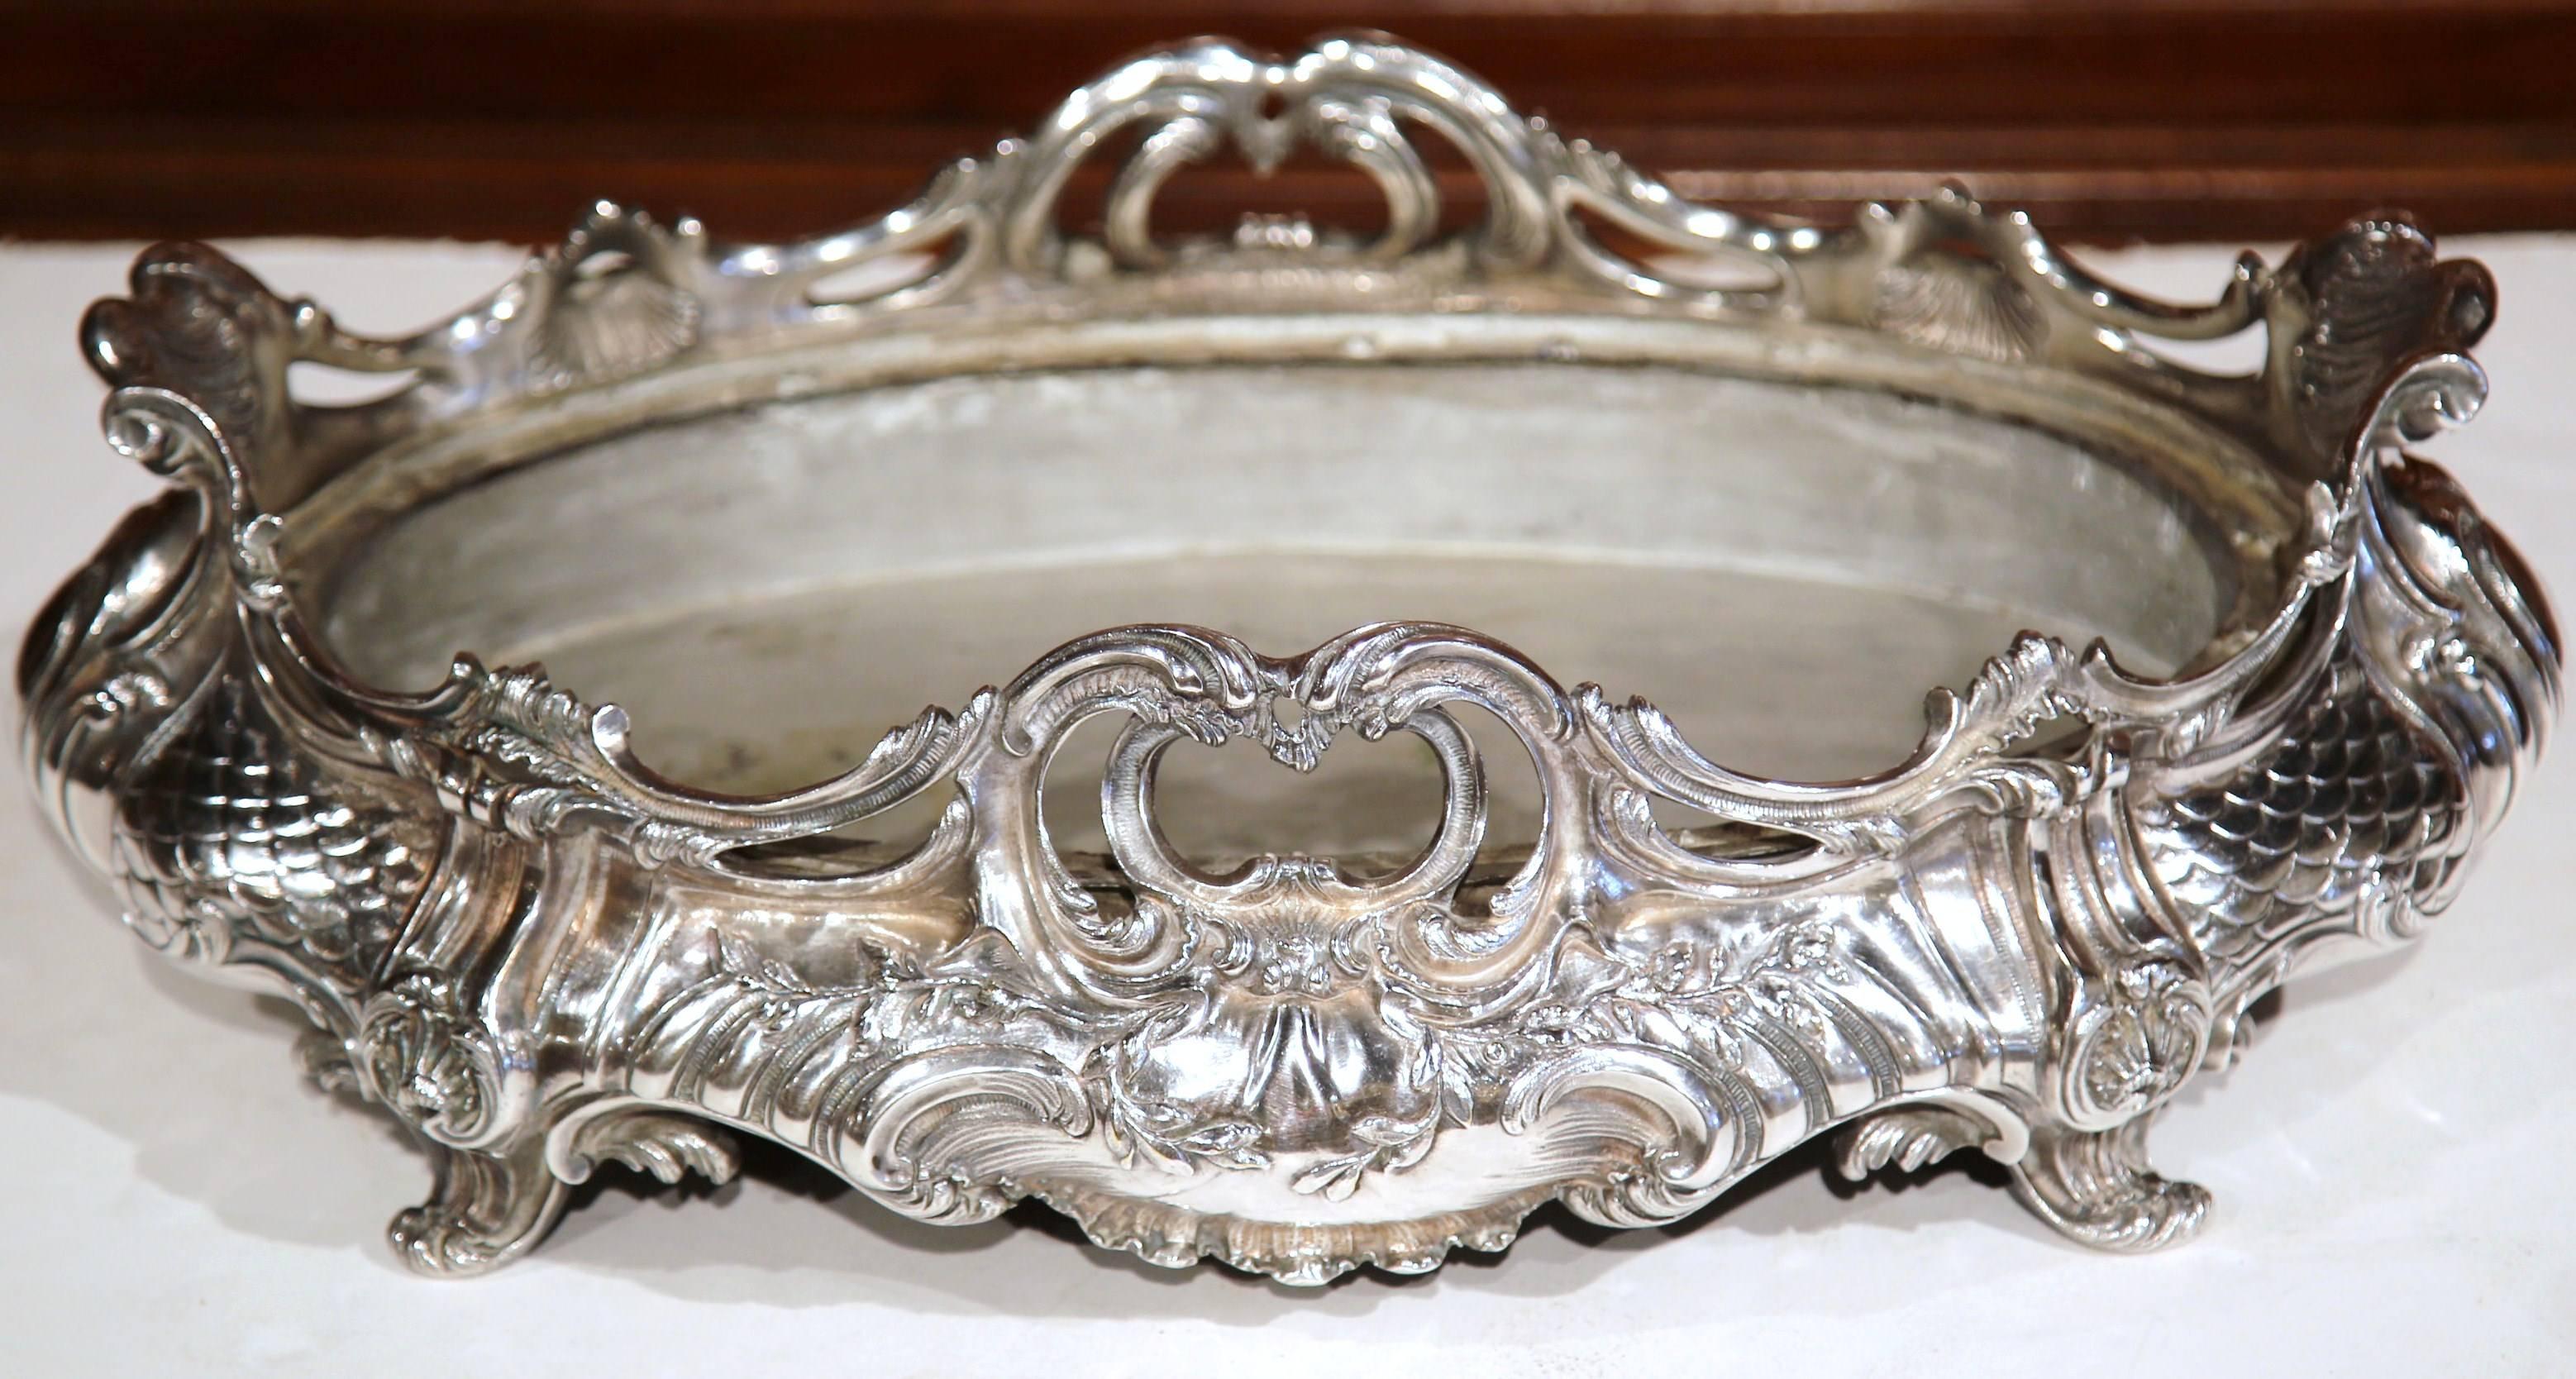 19th Century French Louis XV Silver Plated Oval Jardinière Center Piece 1